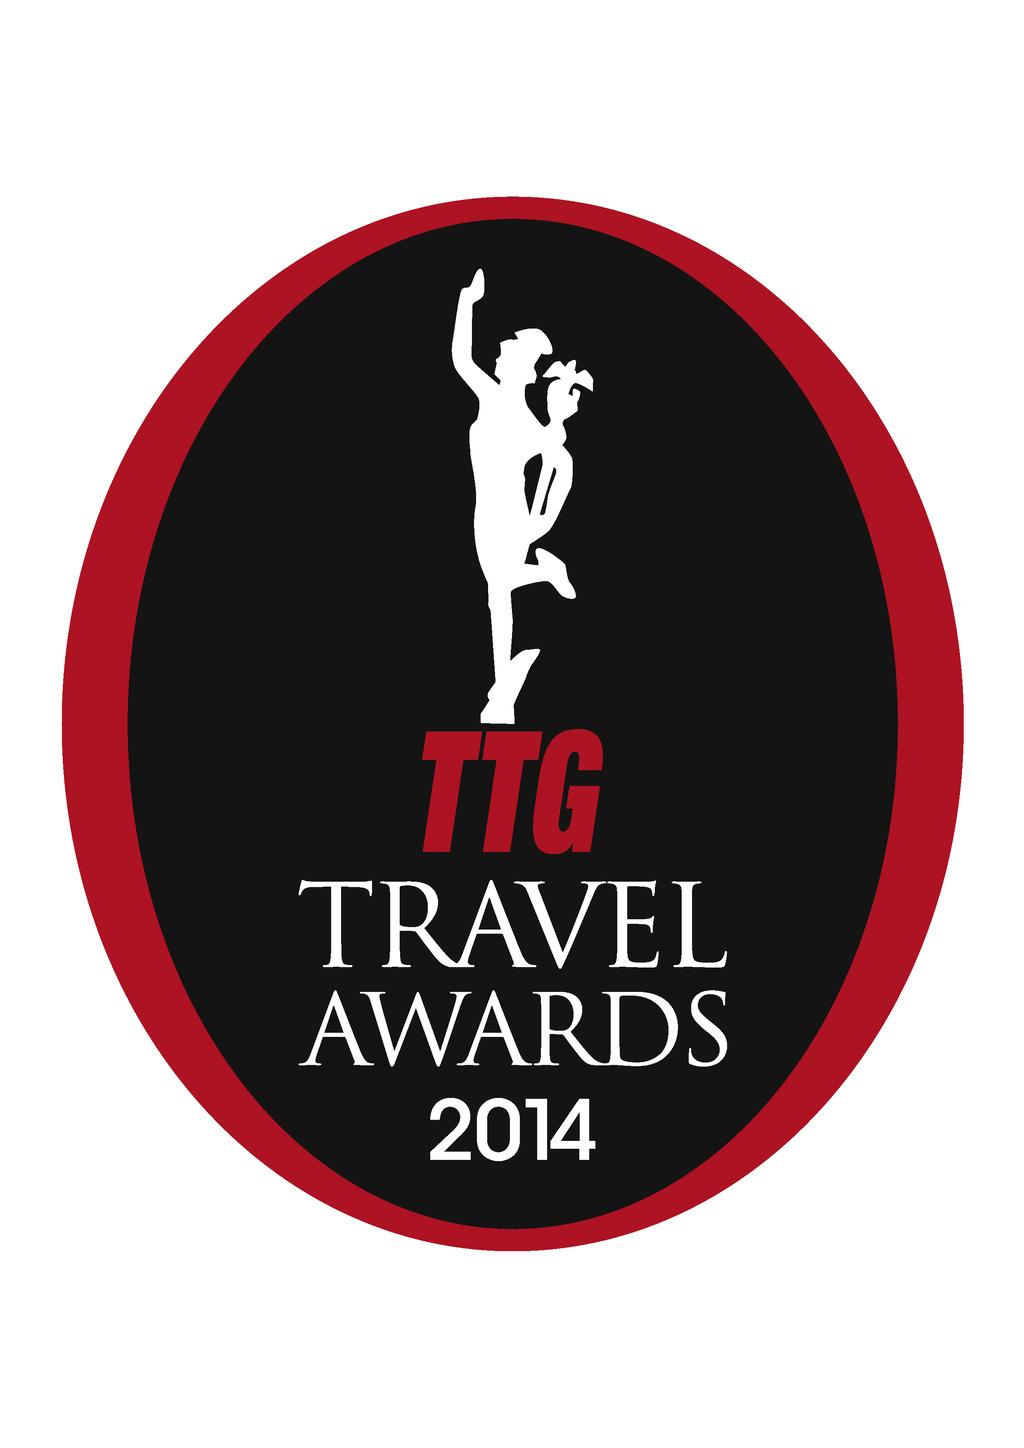 PRESS RELEASE Please embargo all information until 2 October 2014, 10pm Bangkok Time TTG Travel Awards 2014 Celebrates Its Silver Jubilee With 82 Of The Region s Best And Brightest Organisations